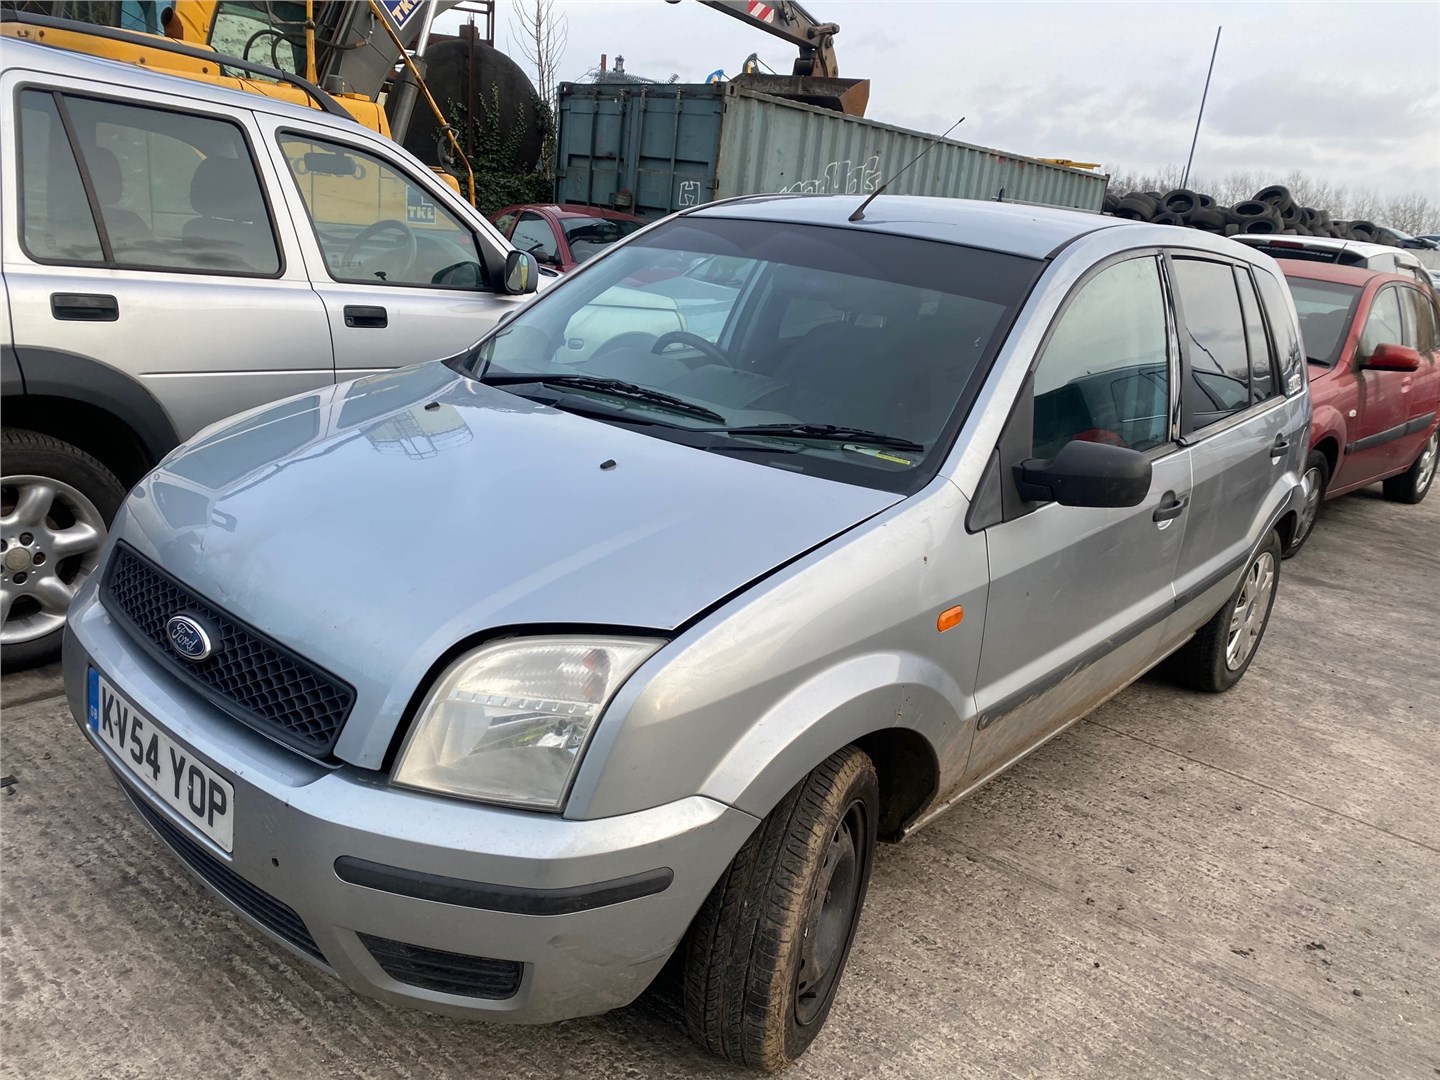 2s6t14a390aa Блок реле Ford Fusion 2002-2012 2004